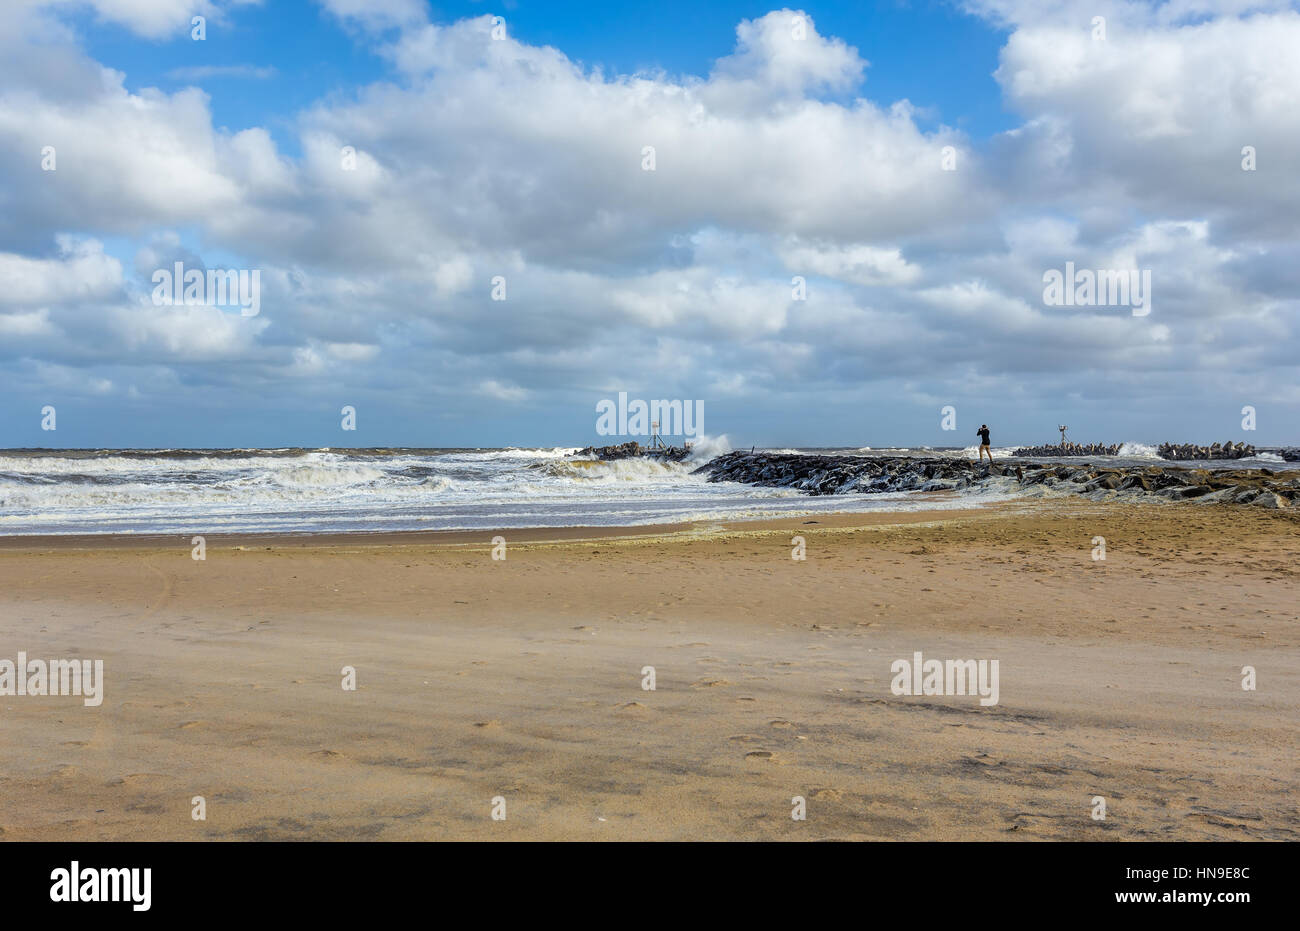 The New Jersey shore at manasquan Inlet. The ocean is rough as there is a storm out to sea. There is a lone person standing on a rock jetty. Stock Photo